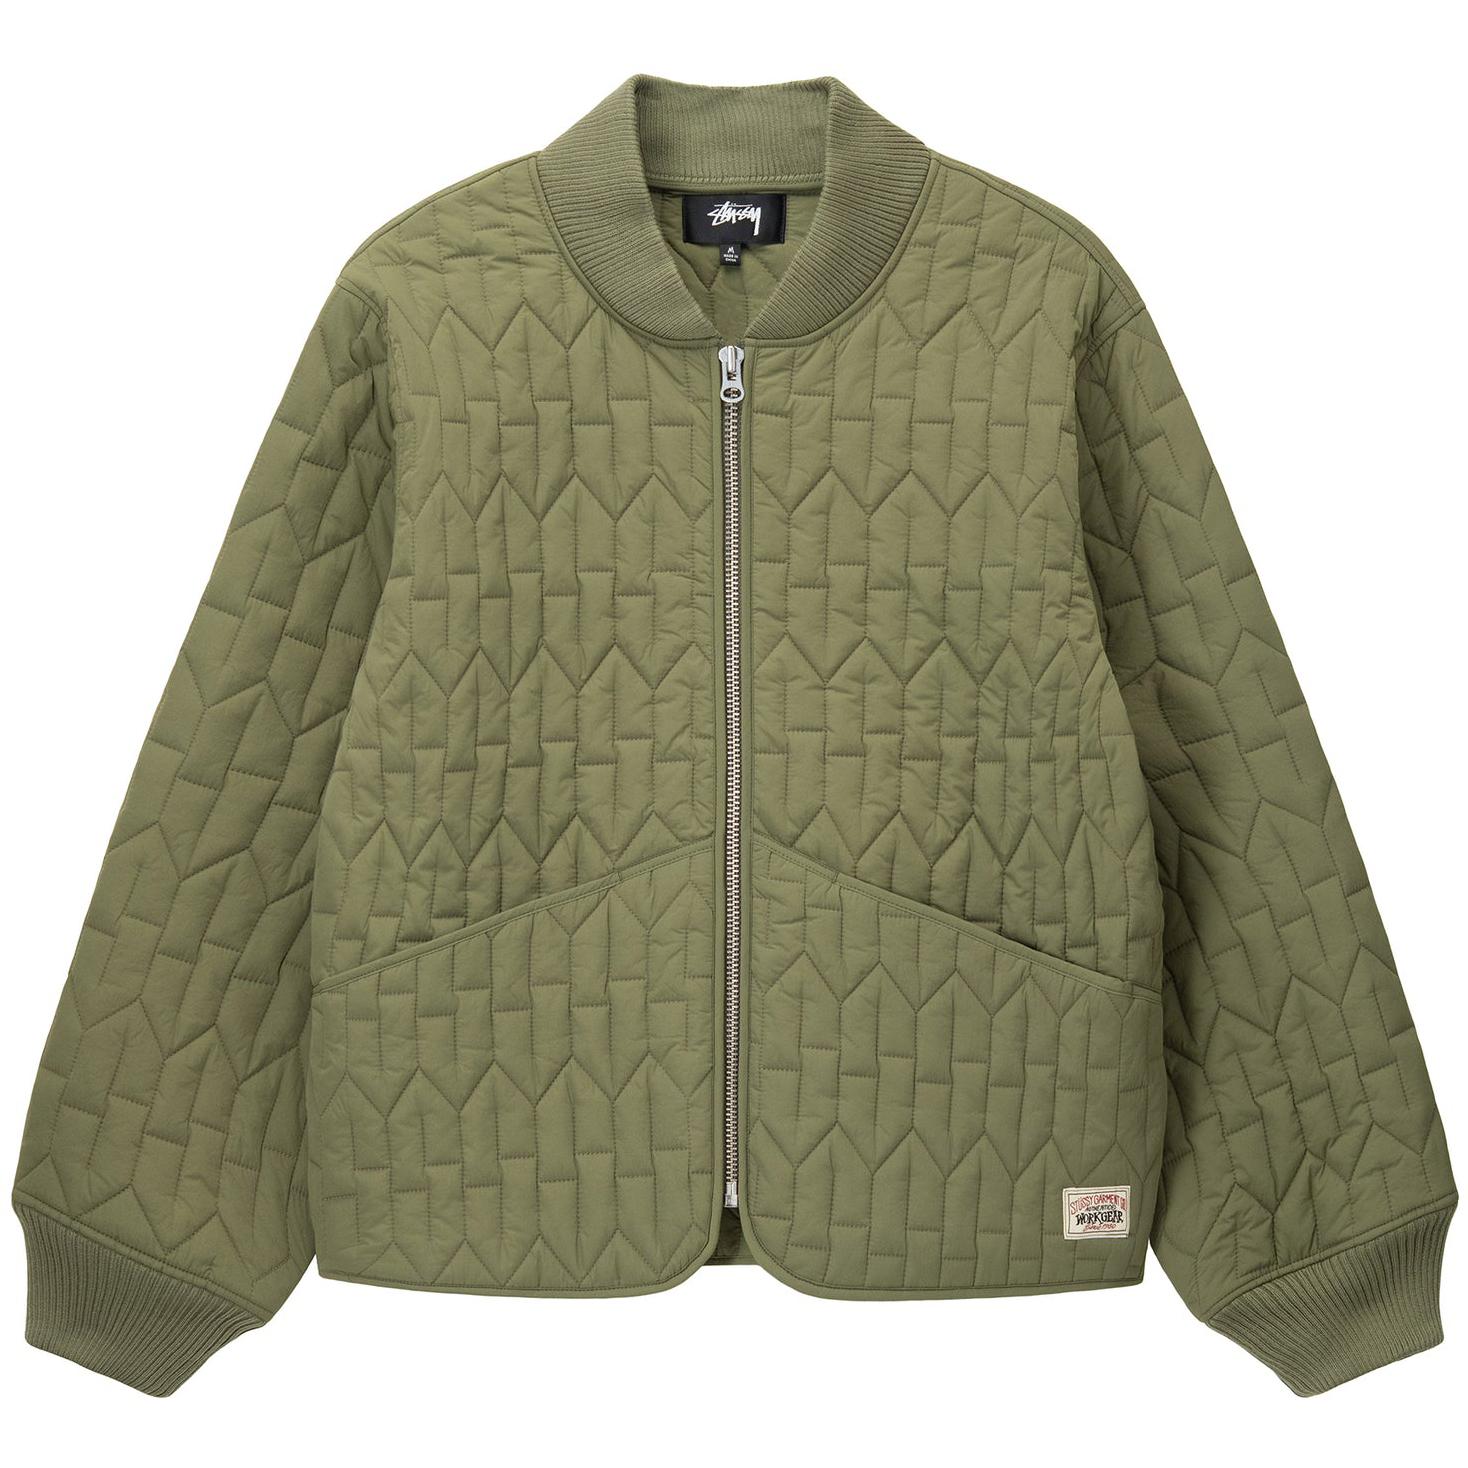 Jacket lines. Куртка Stussy. S Quilted Liner Jacket. The North face Ampato Quilted Liner Jacket. Куртка Stussy зимняя красная.